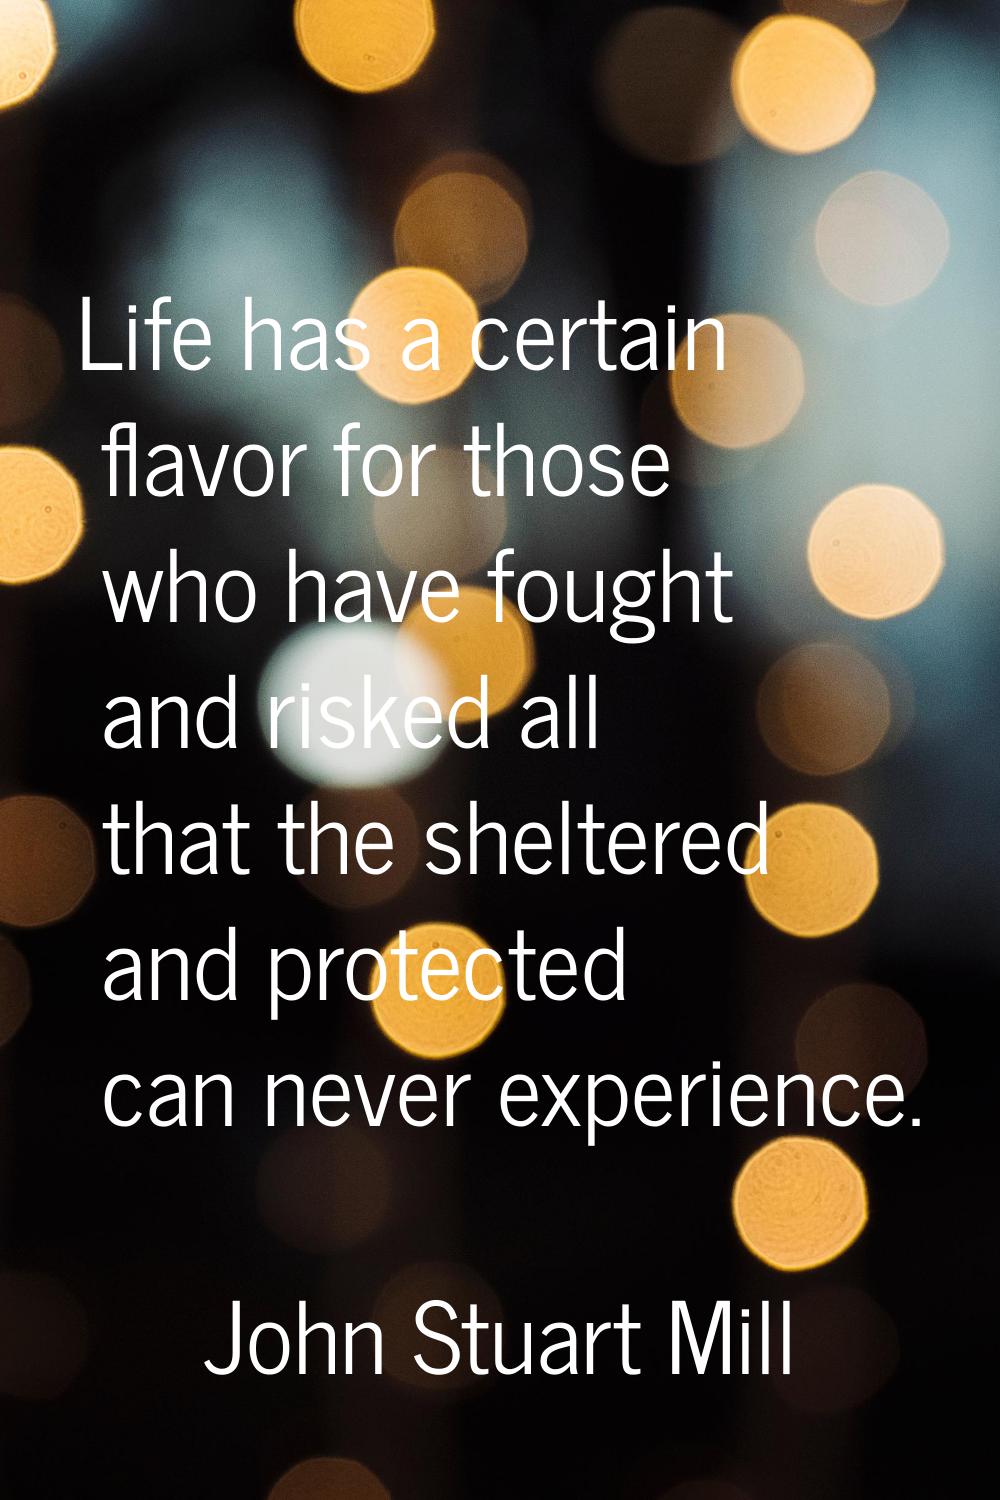 Life has a certain flavor for those who have fought and risked all that the sheltered and protected